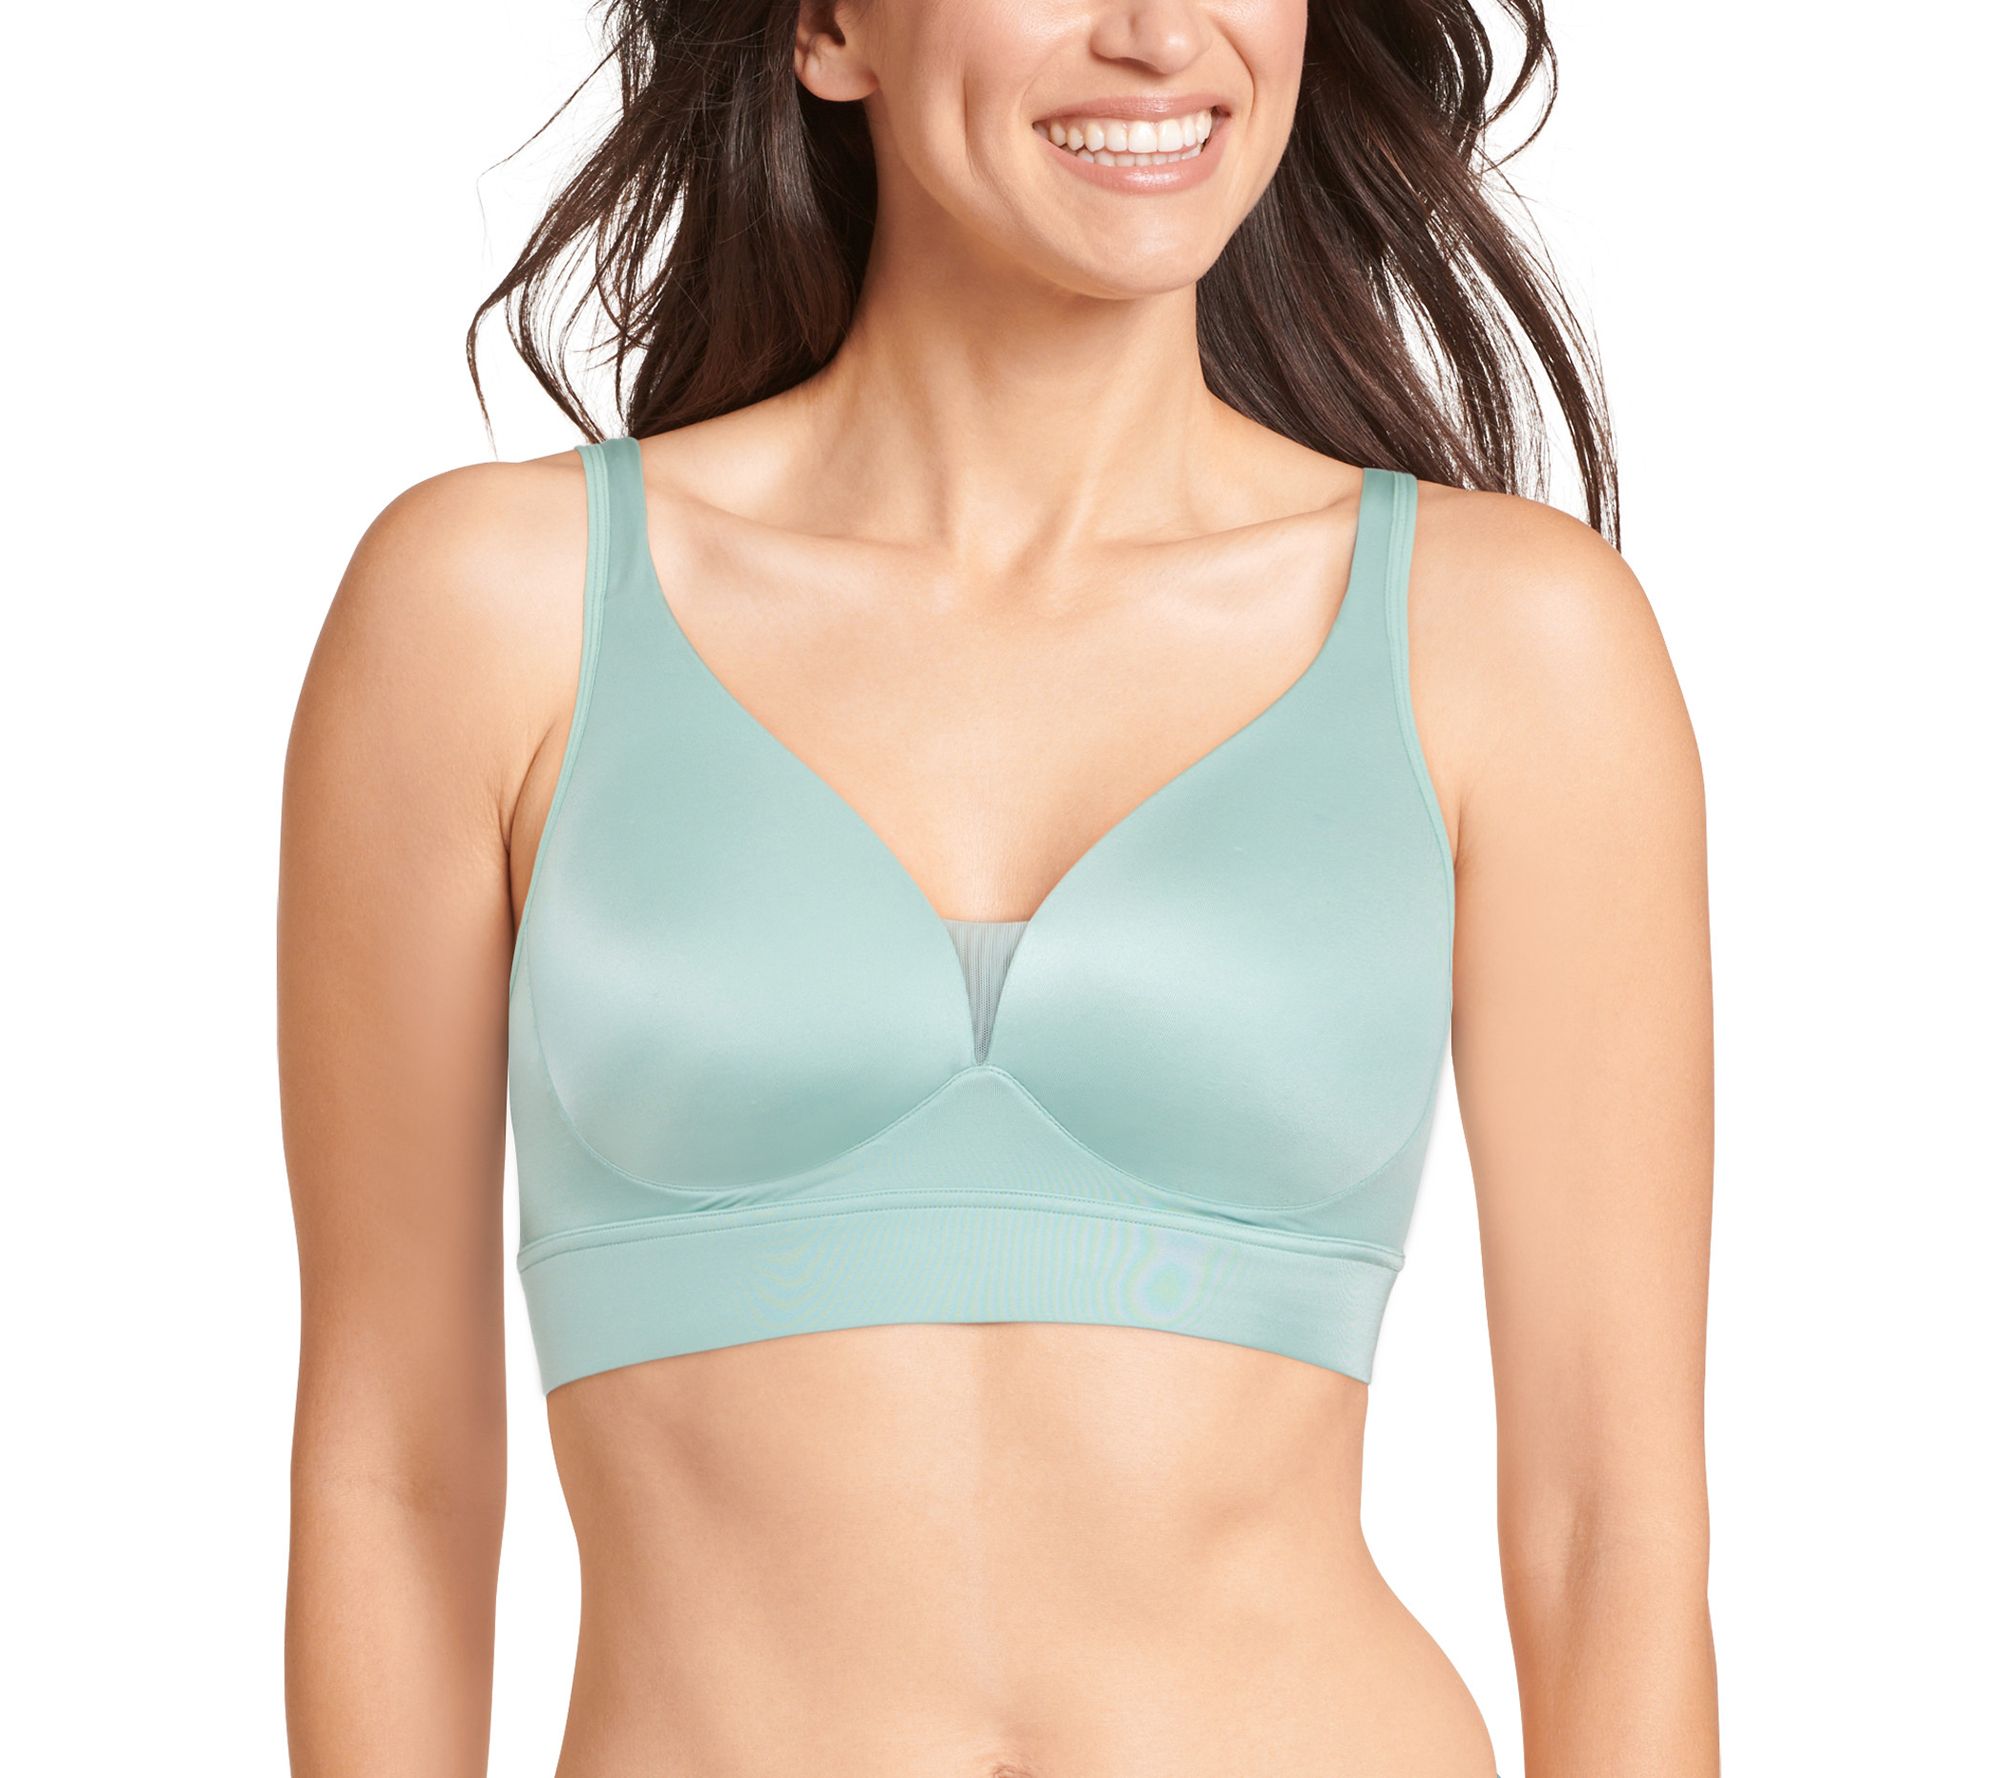 Jockey Forever Fit Wirefree Molded Cup Bra Earth Rose Large A349322